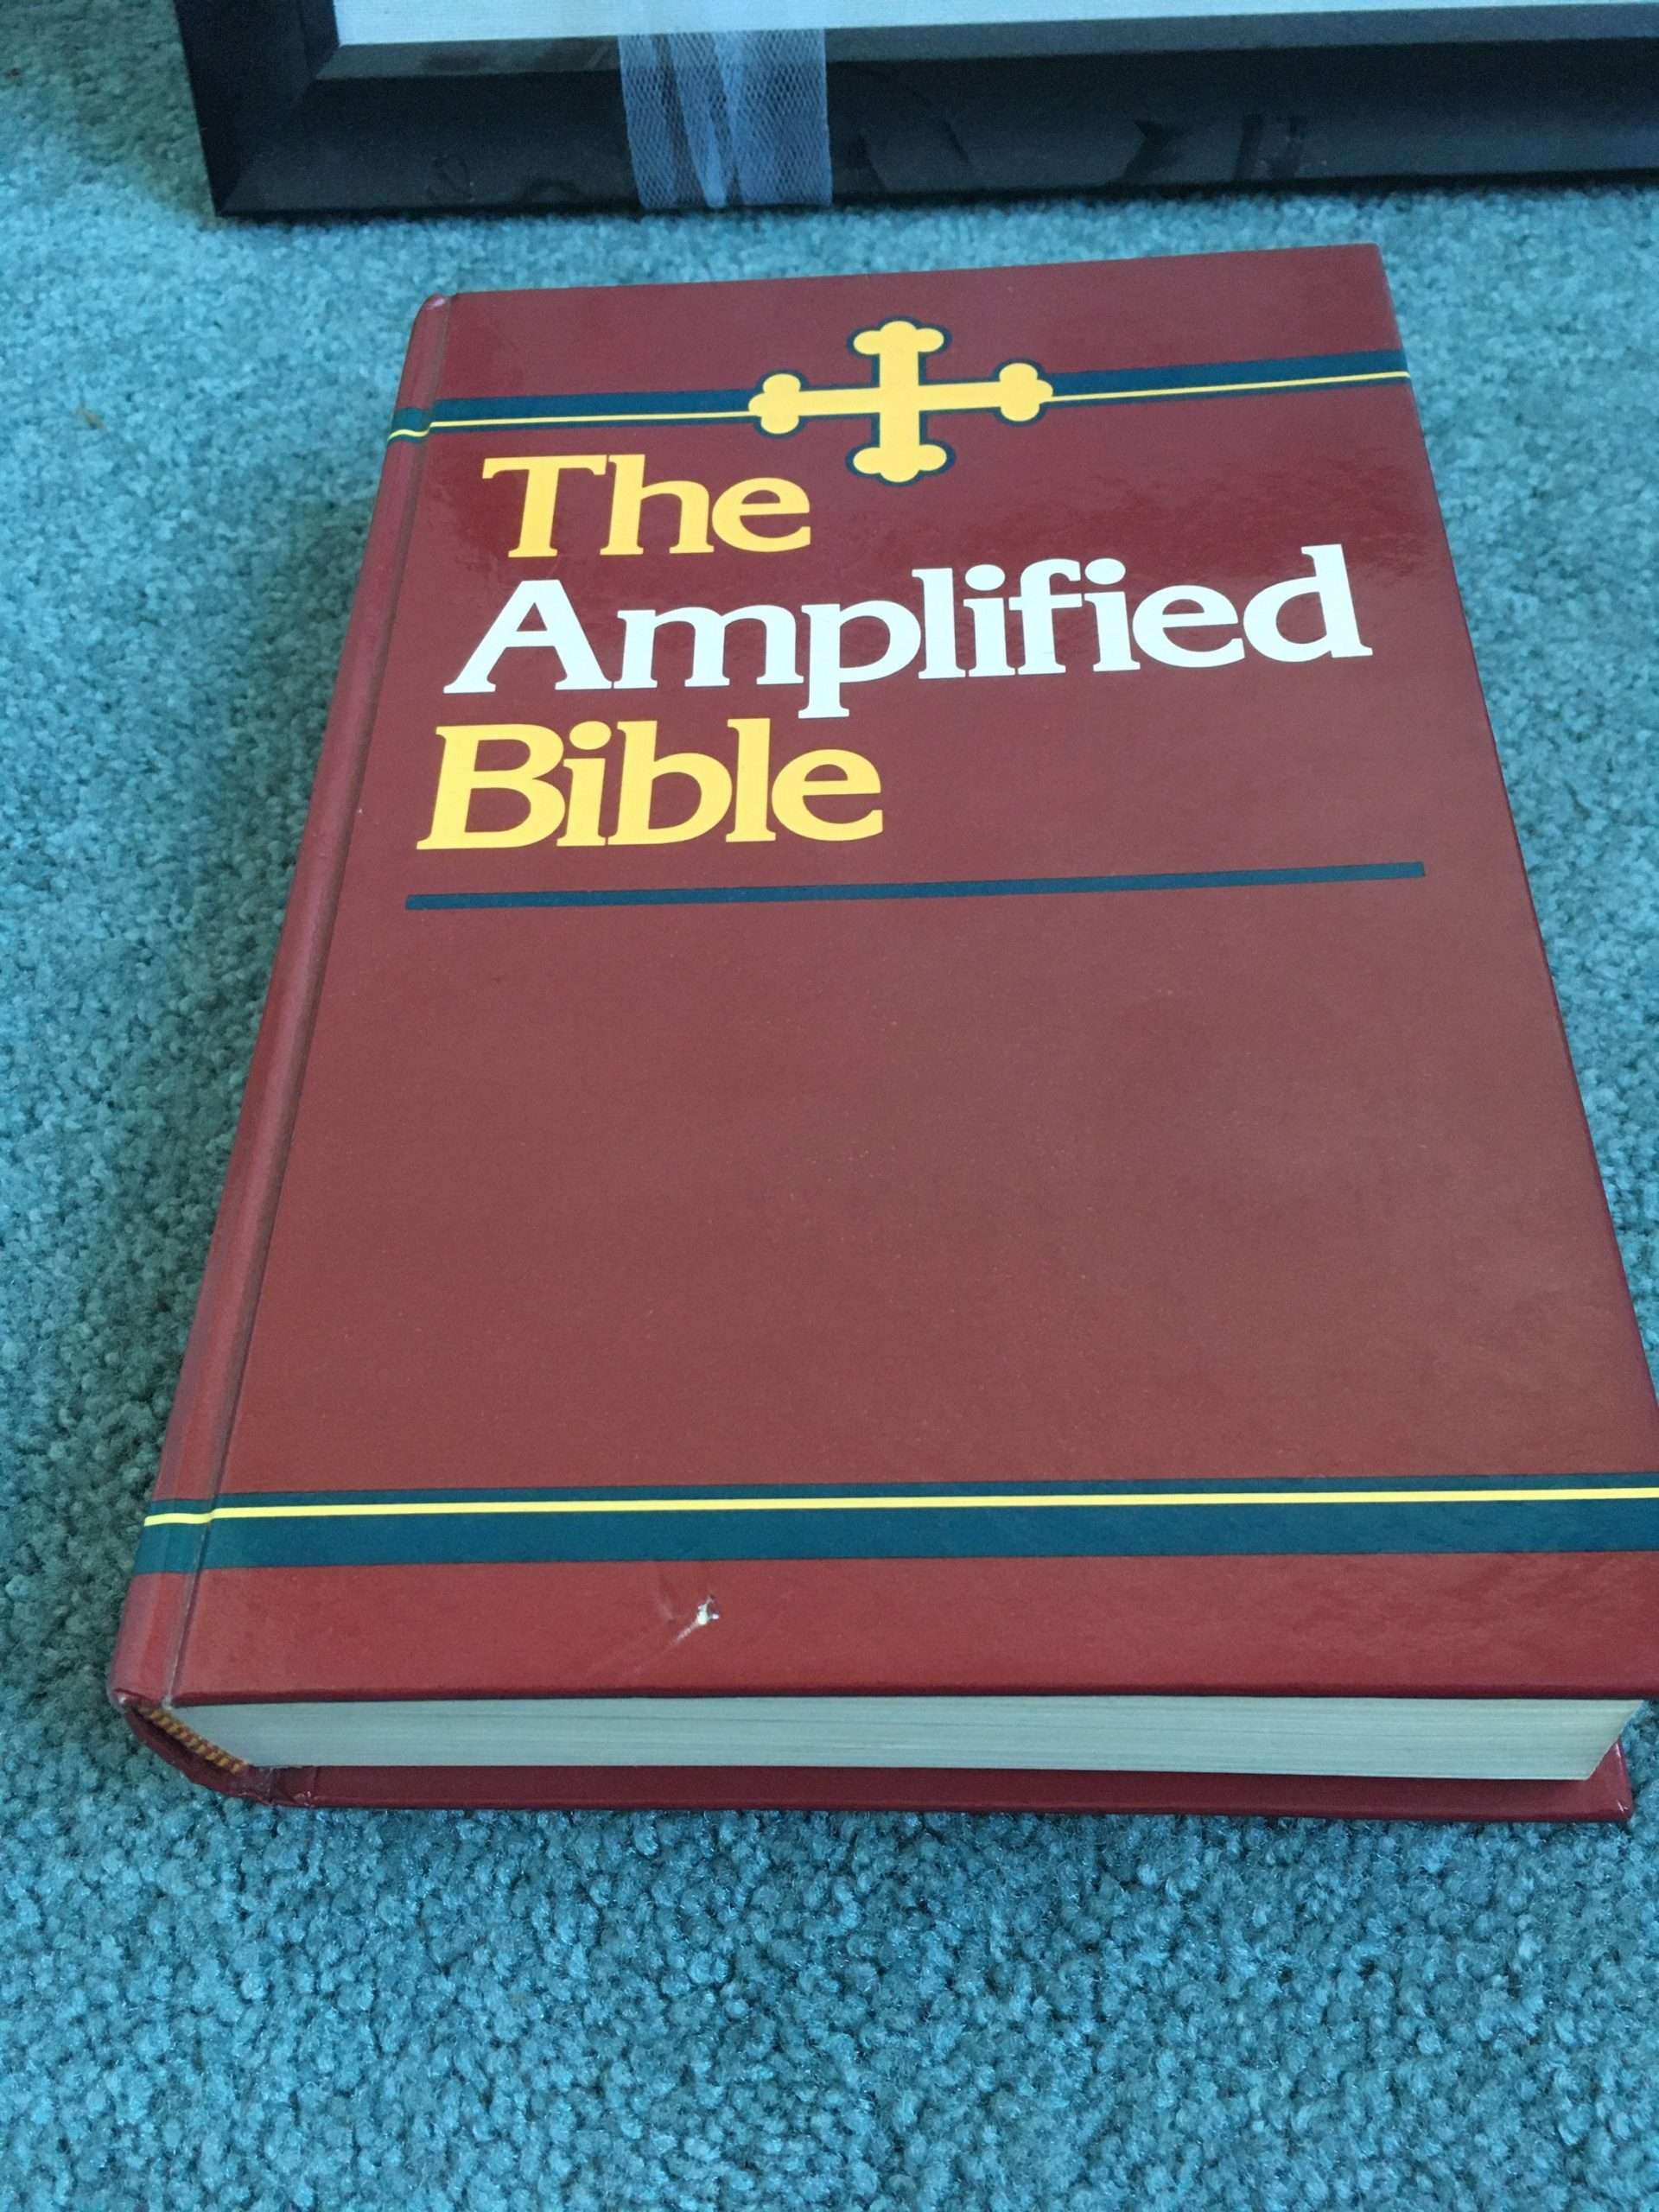 AMPC CLASSIC AMPLIFIED Bible Hard Back Large Print 1987